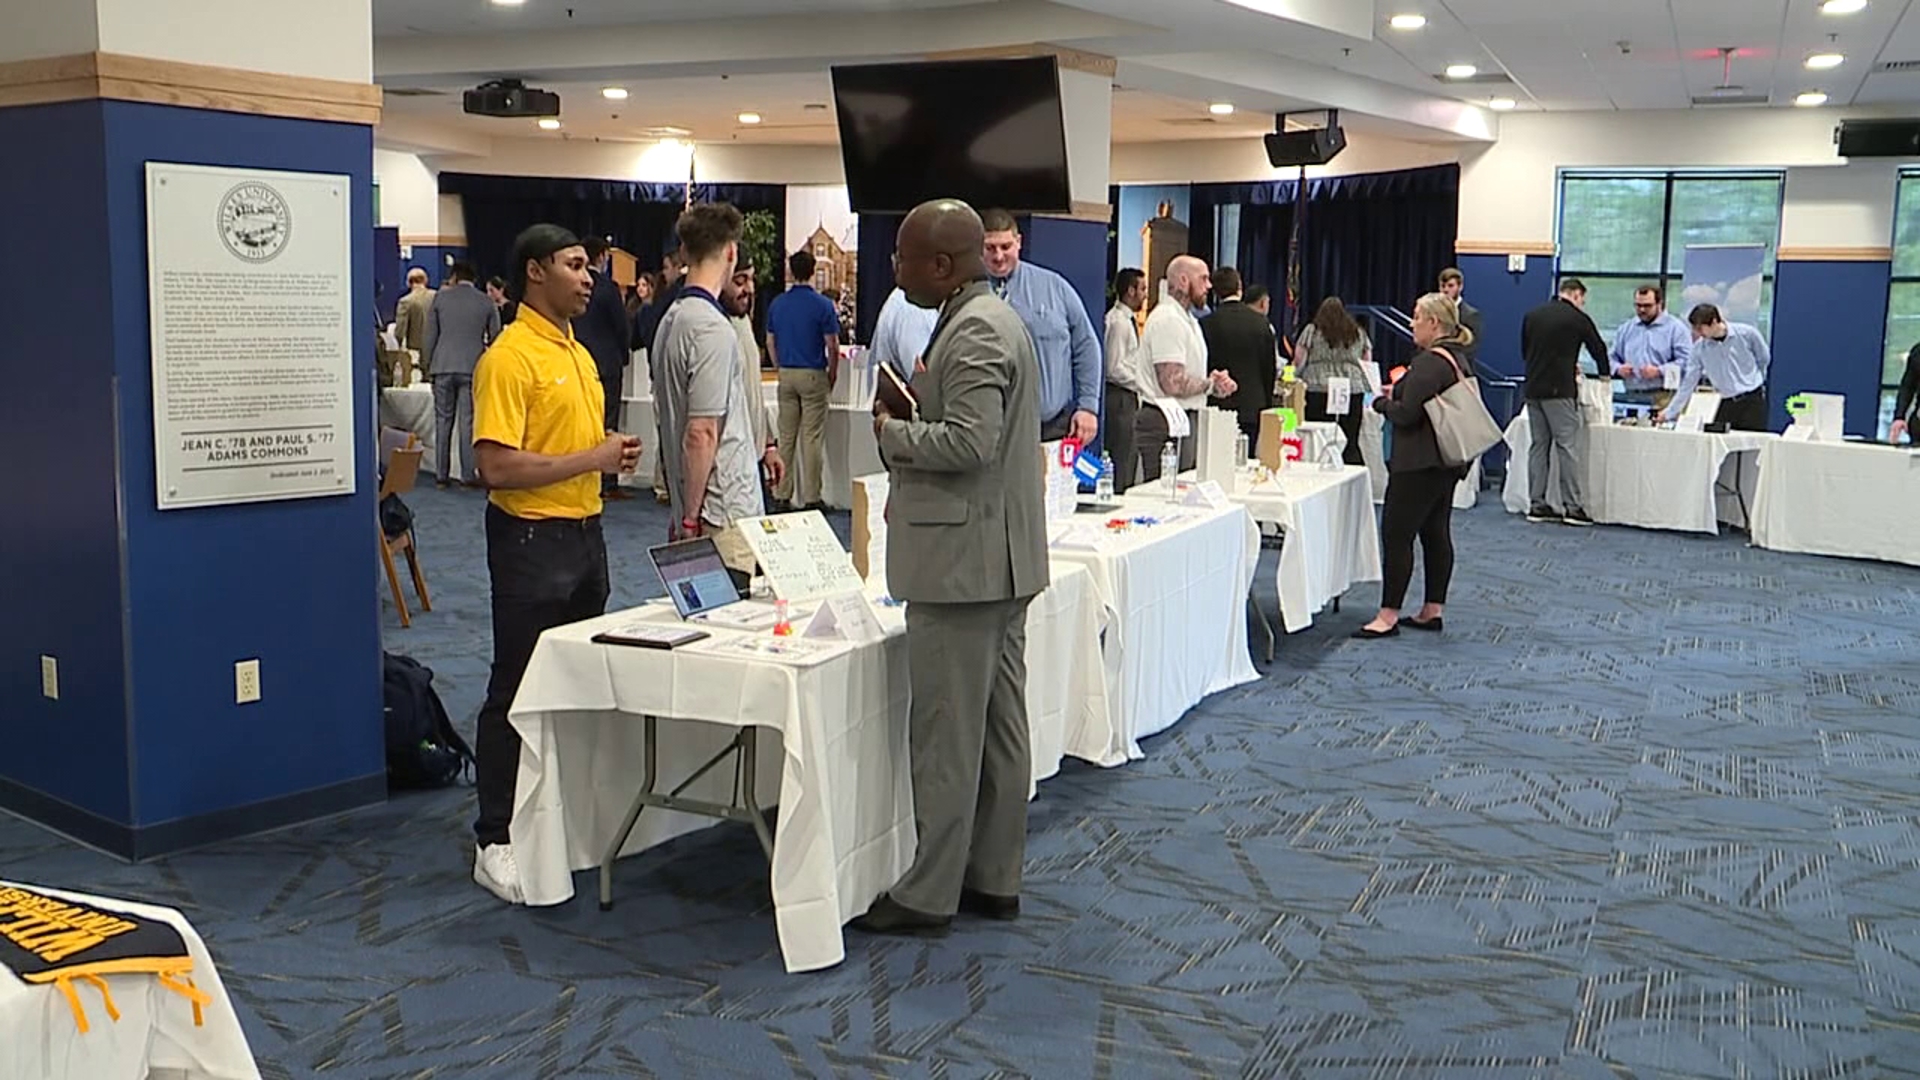 Students at Wilkes University presented projects to potential employers Tuesday at a reverse career fair.